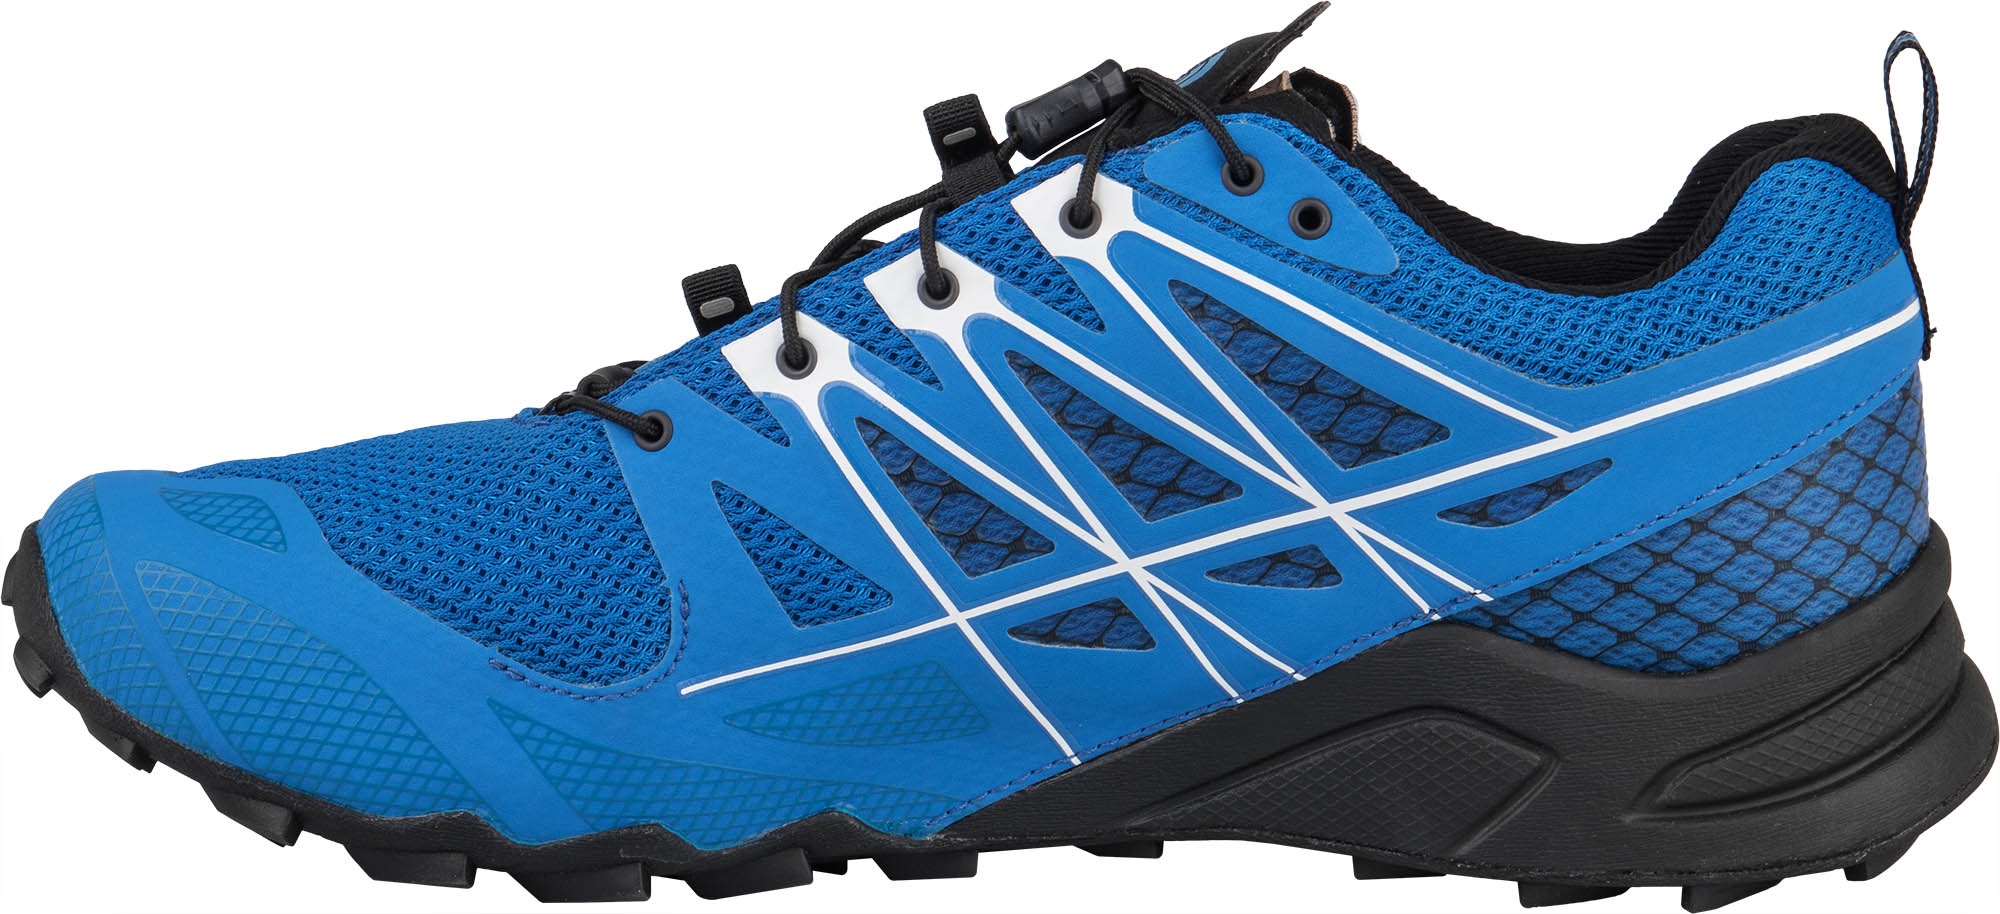 the north face m ultra mt gtx